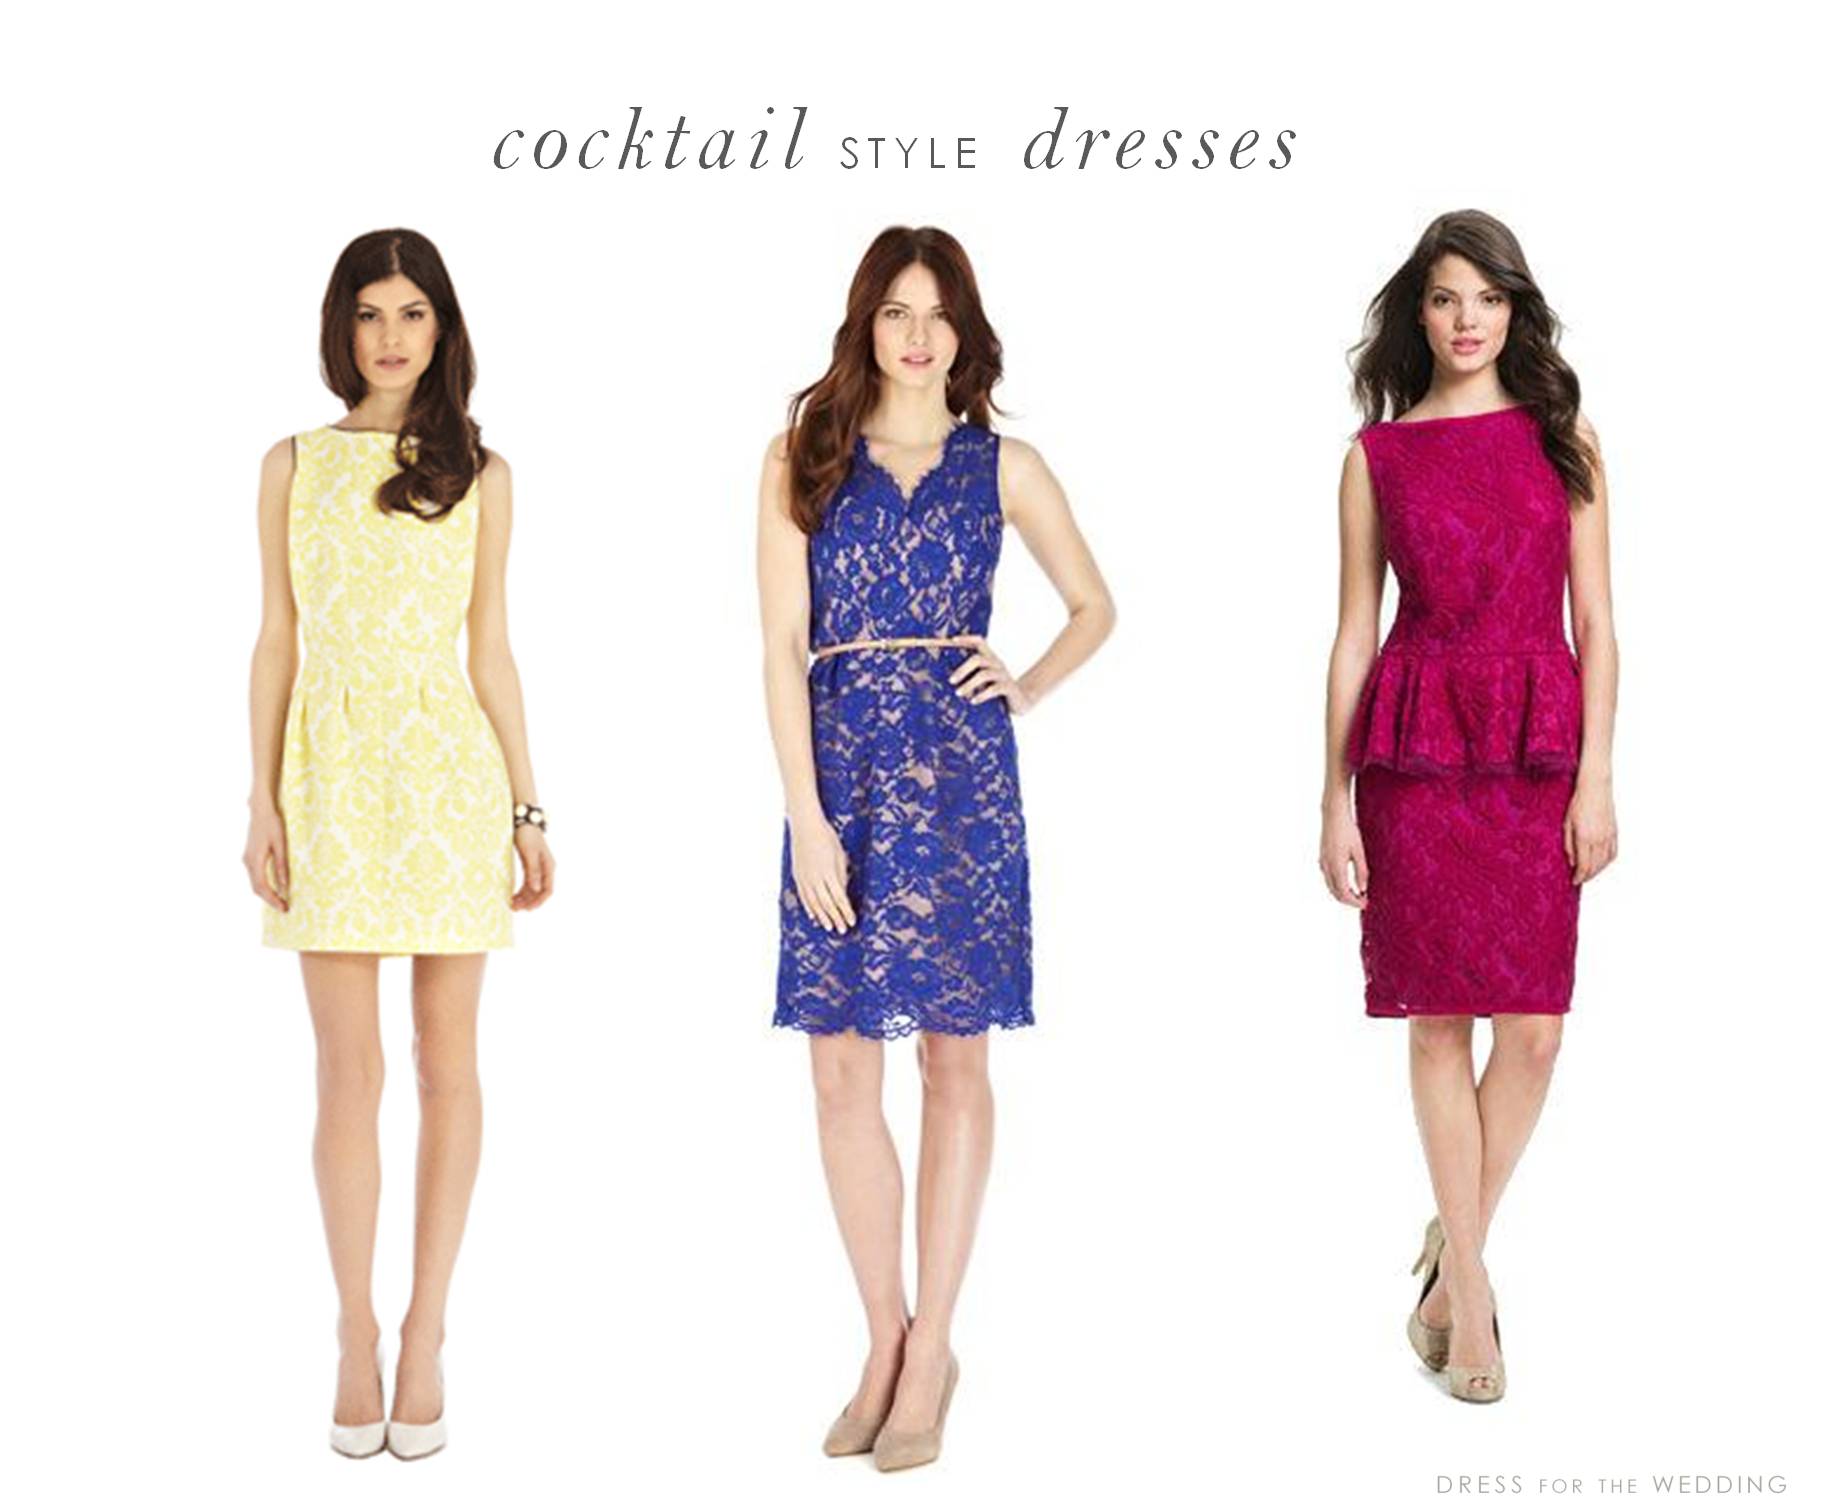 Cocktail Dresses Archives at Dress for the Wedding